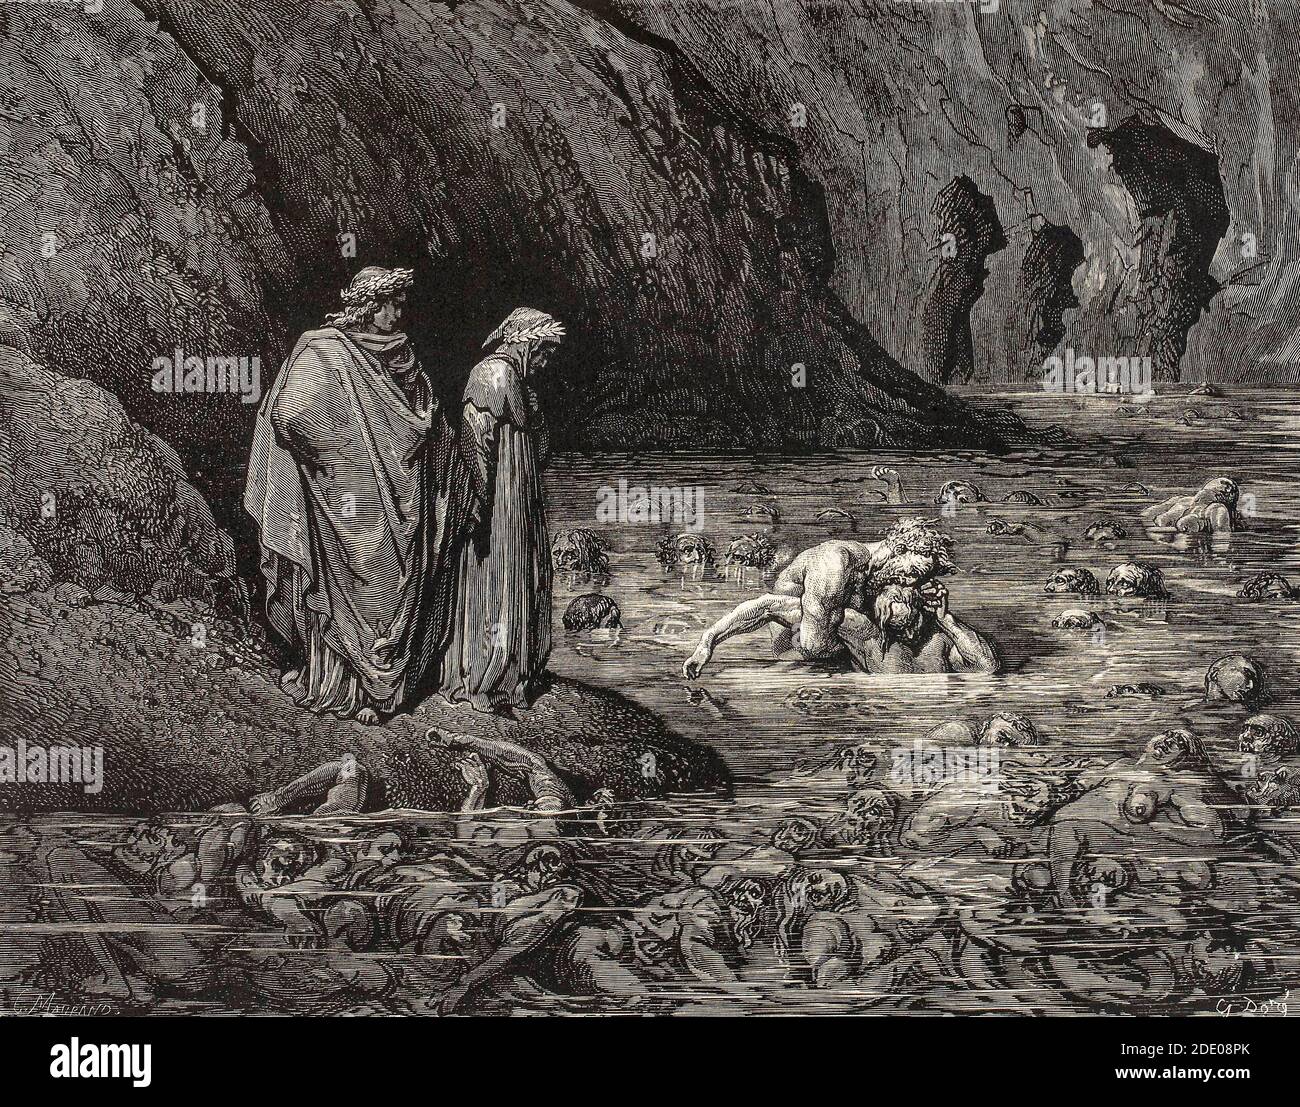 Dante Divina Commedia - Hell - XXXII Canto - Dante and Virgil in  ice of Cocito, where the traitors of relatives (Caina) and those of the fatherland and the party (Antenora) are punished respectively - Dante and Virgil Meet  with Ugolino and Archbishop Ruggieri   -  IX Circle - illustration by Gustave Dorè Stock Photo